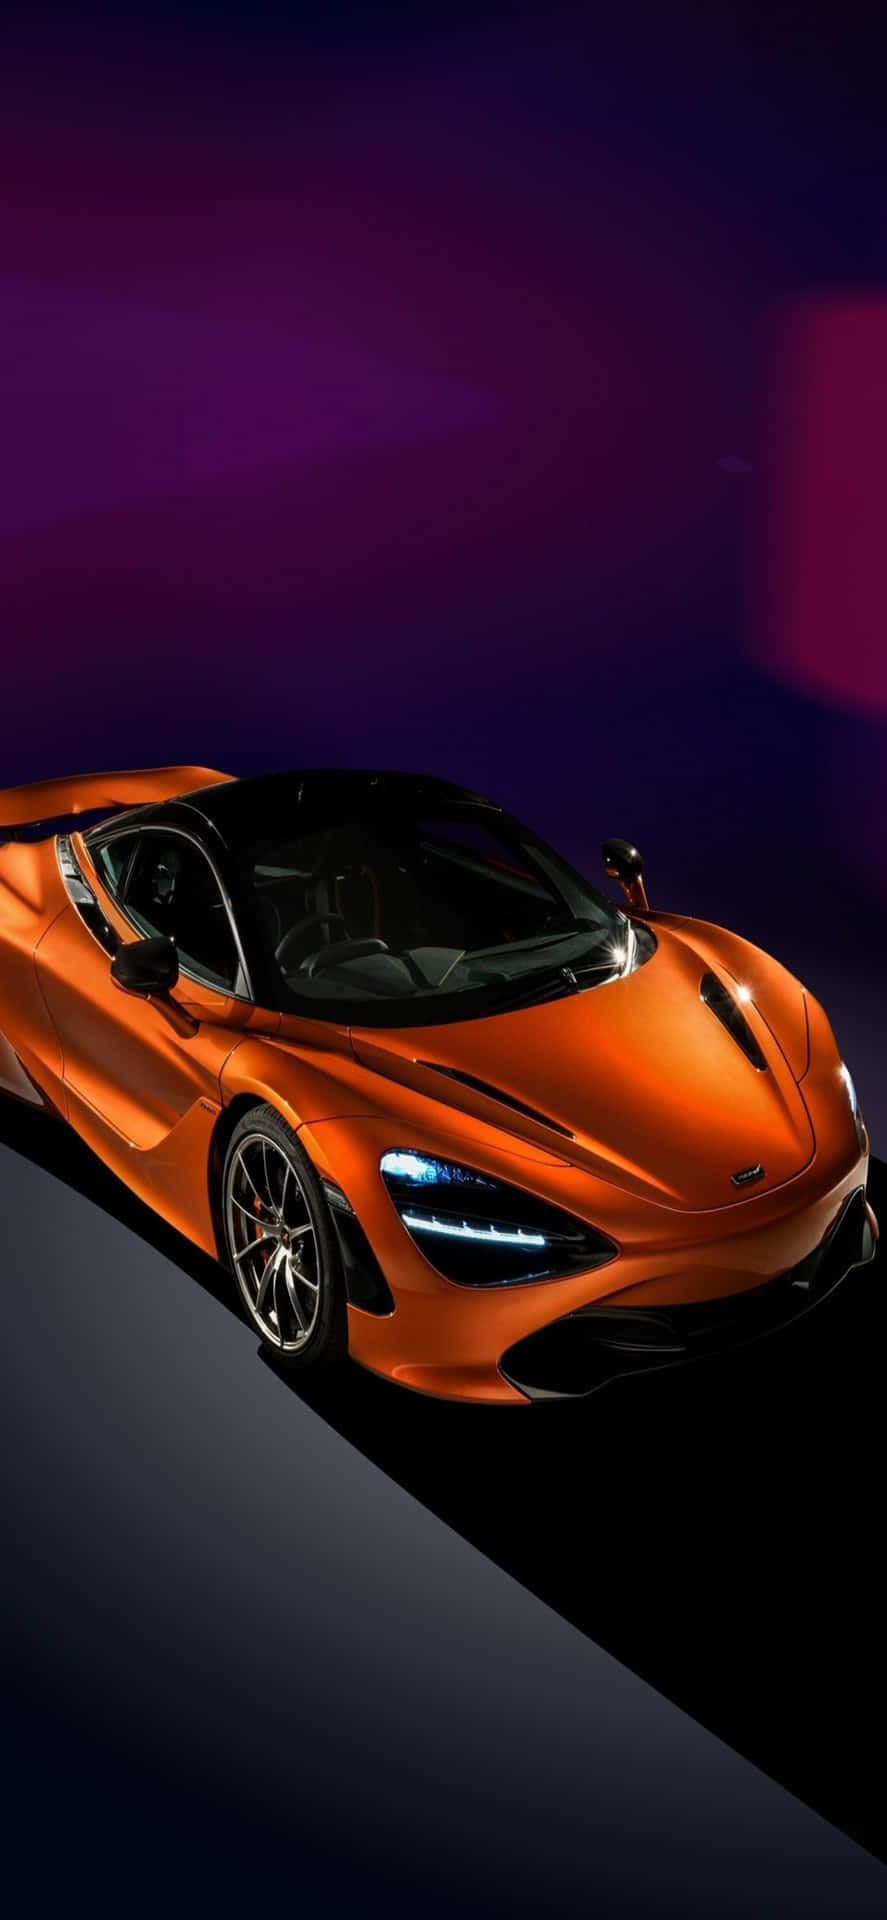 The Exhilarating Combination Of The Iphone Xs And The Mclaren 720s